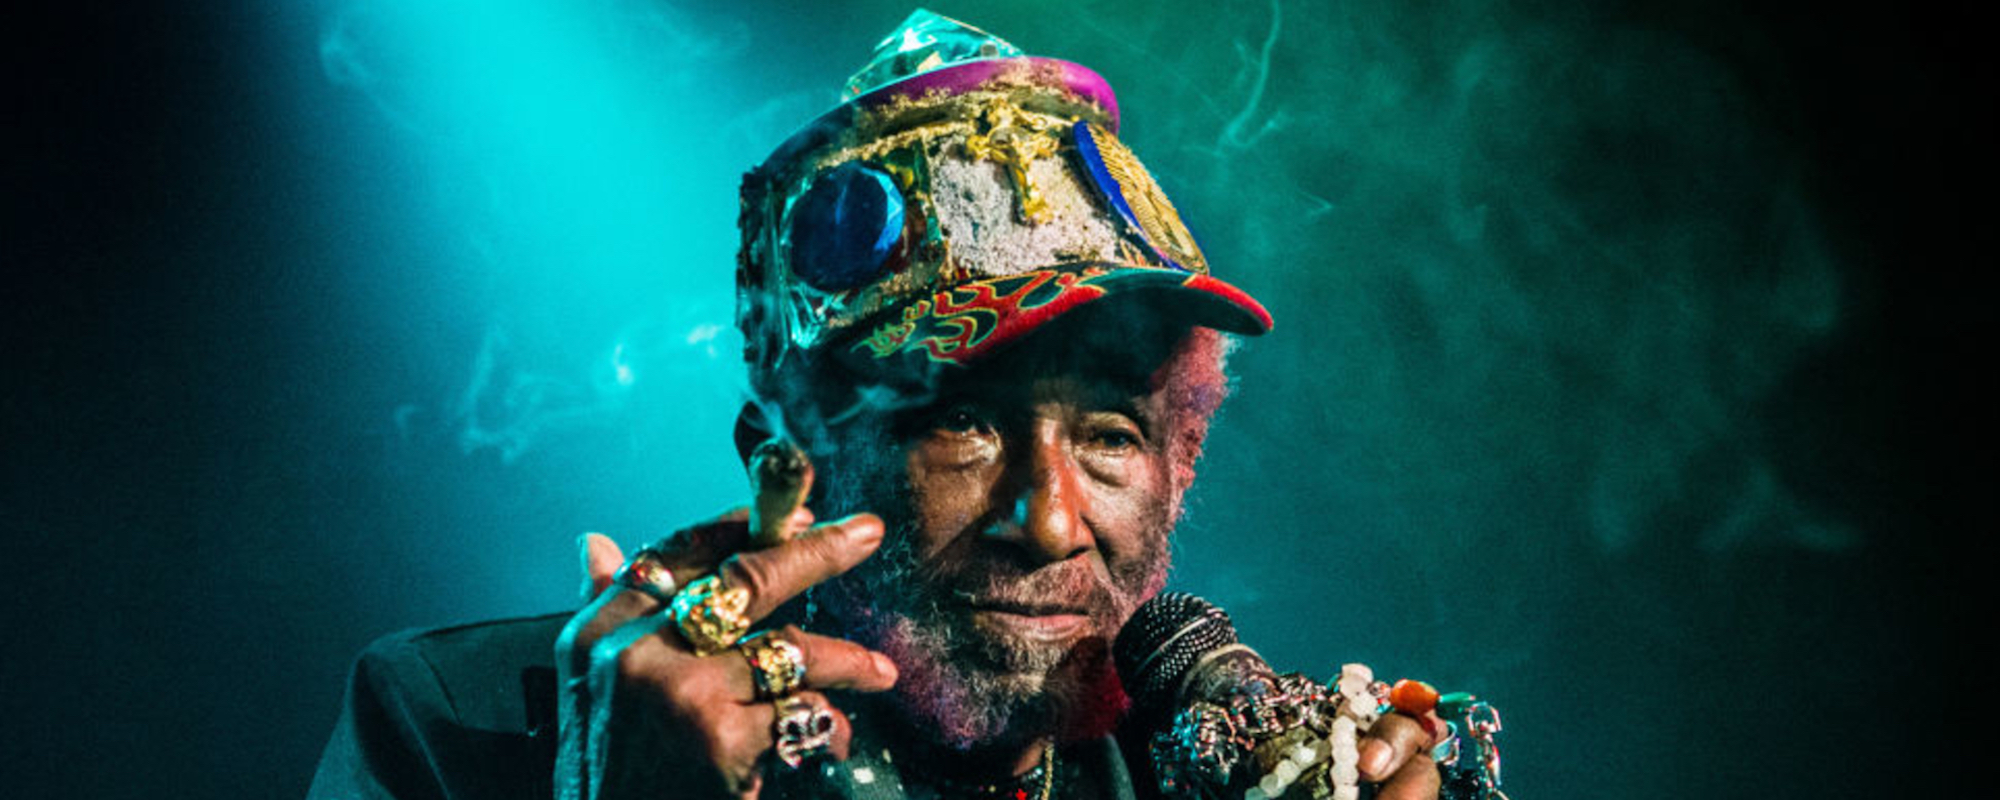 Questions Sparked Around Death of Reggae, Dub Legend— “Lee “Scratch” Perry was Not Sick”